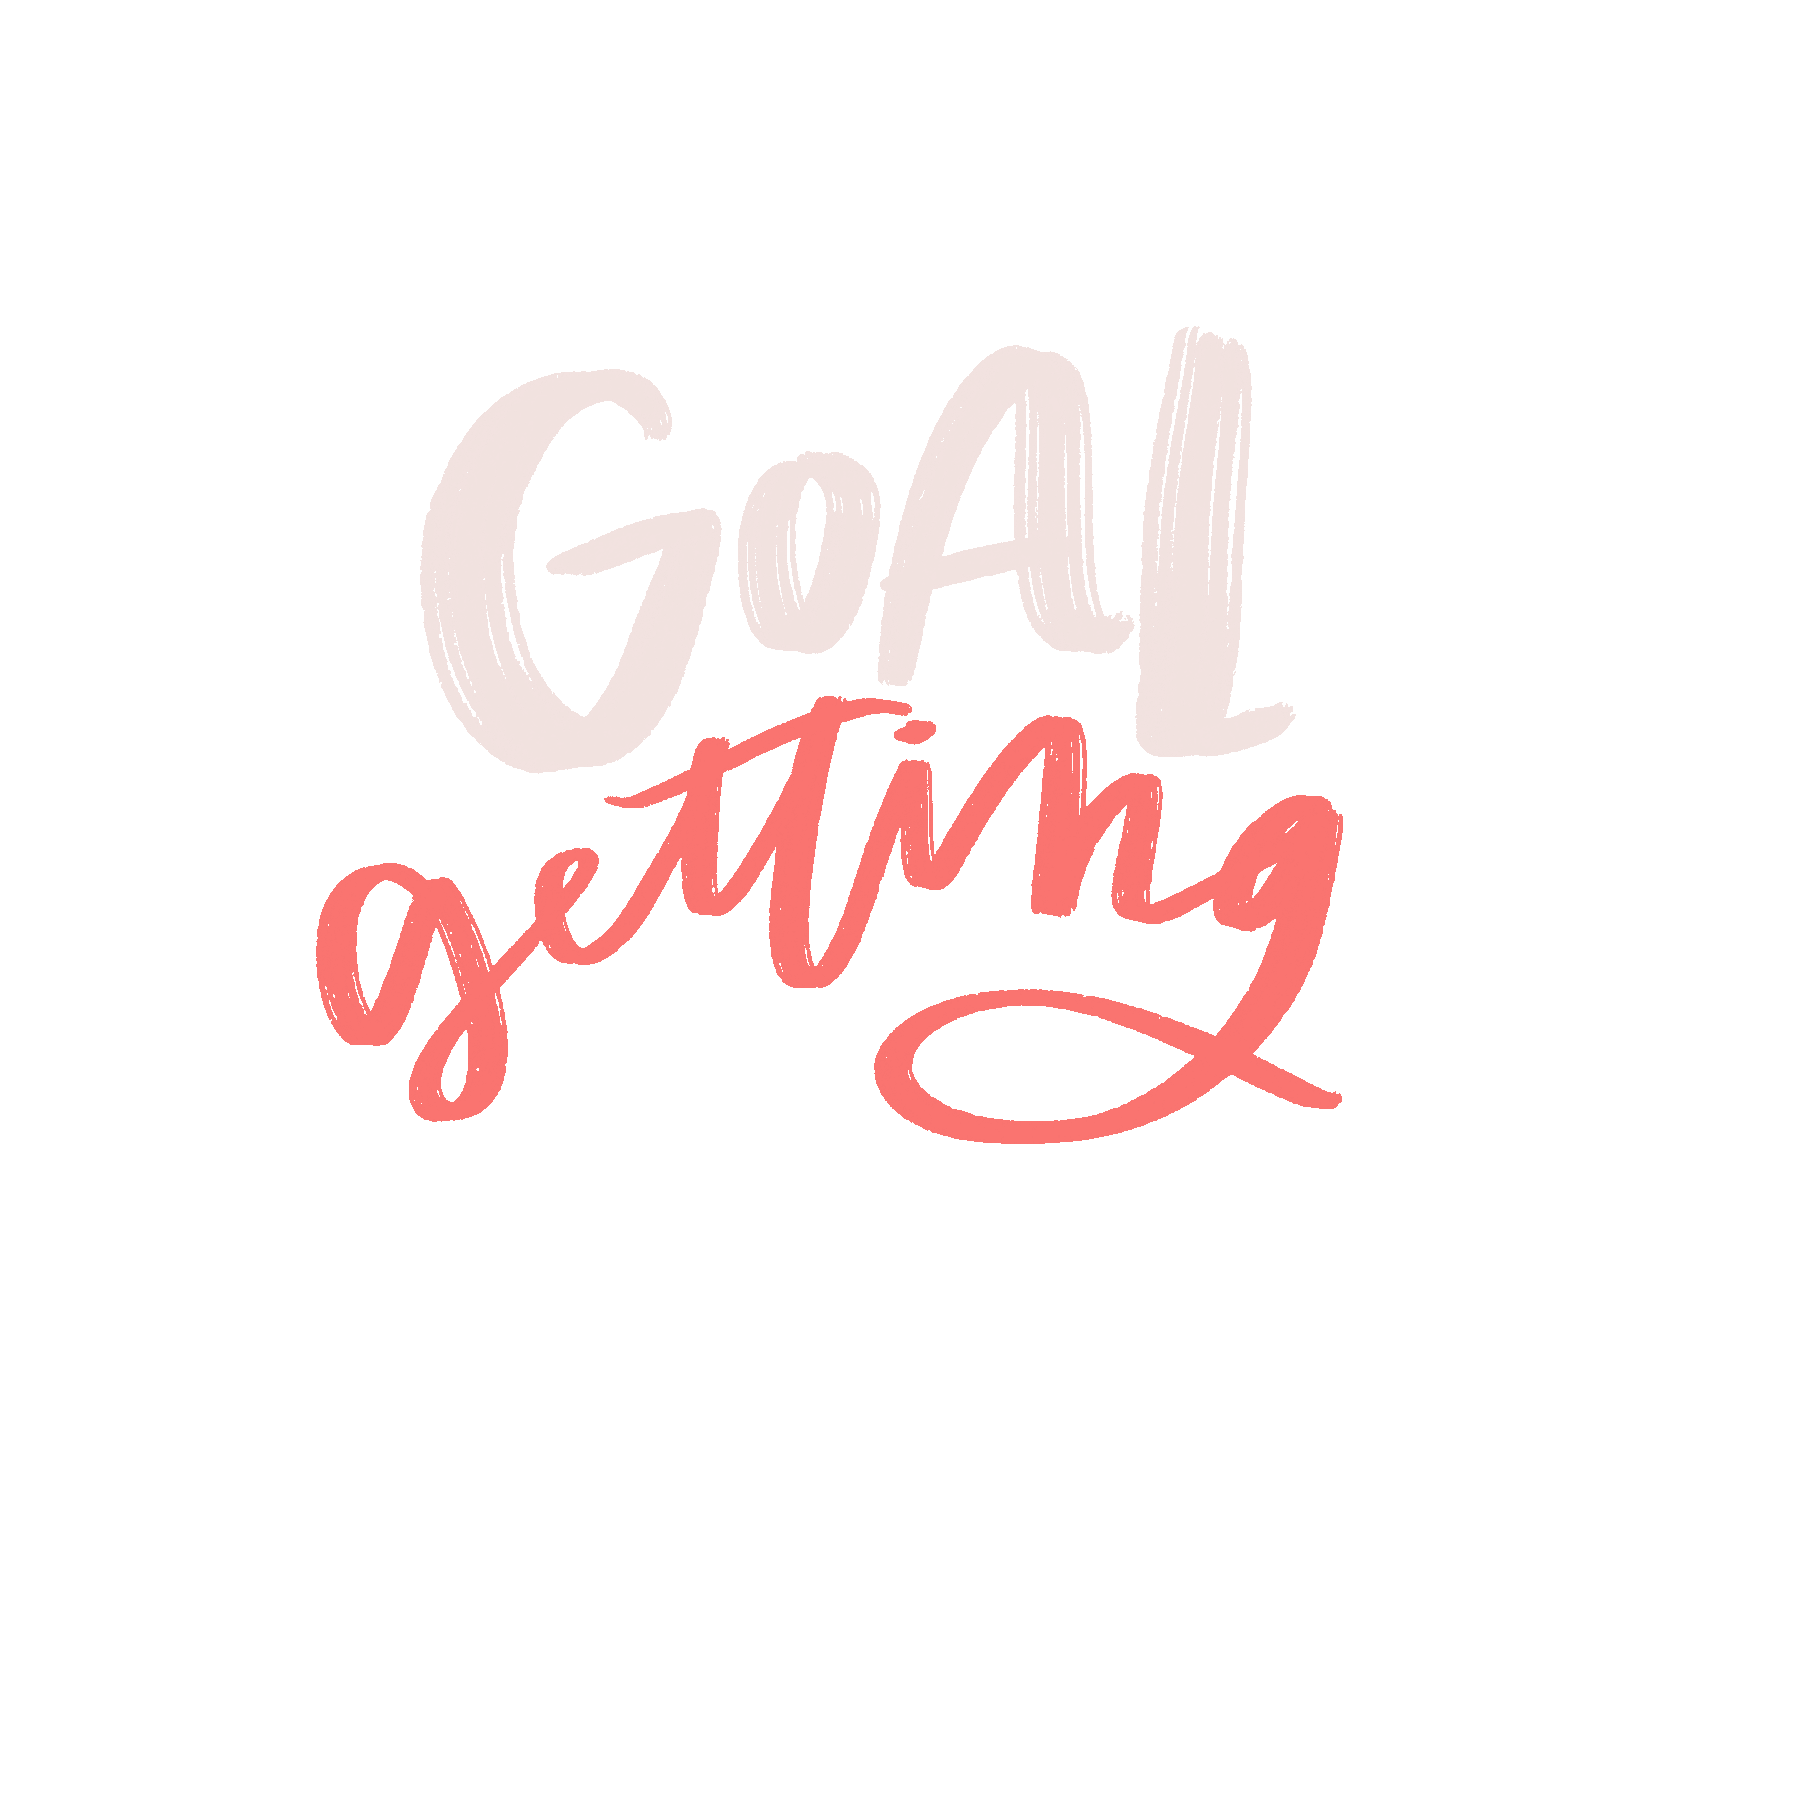 Goals Lettering Sticker by Activator Co. for iOS & Android | GIPHY